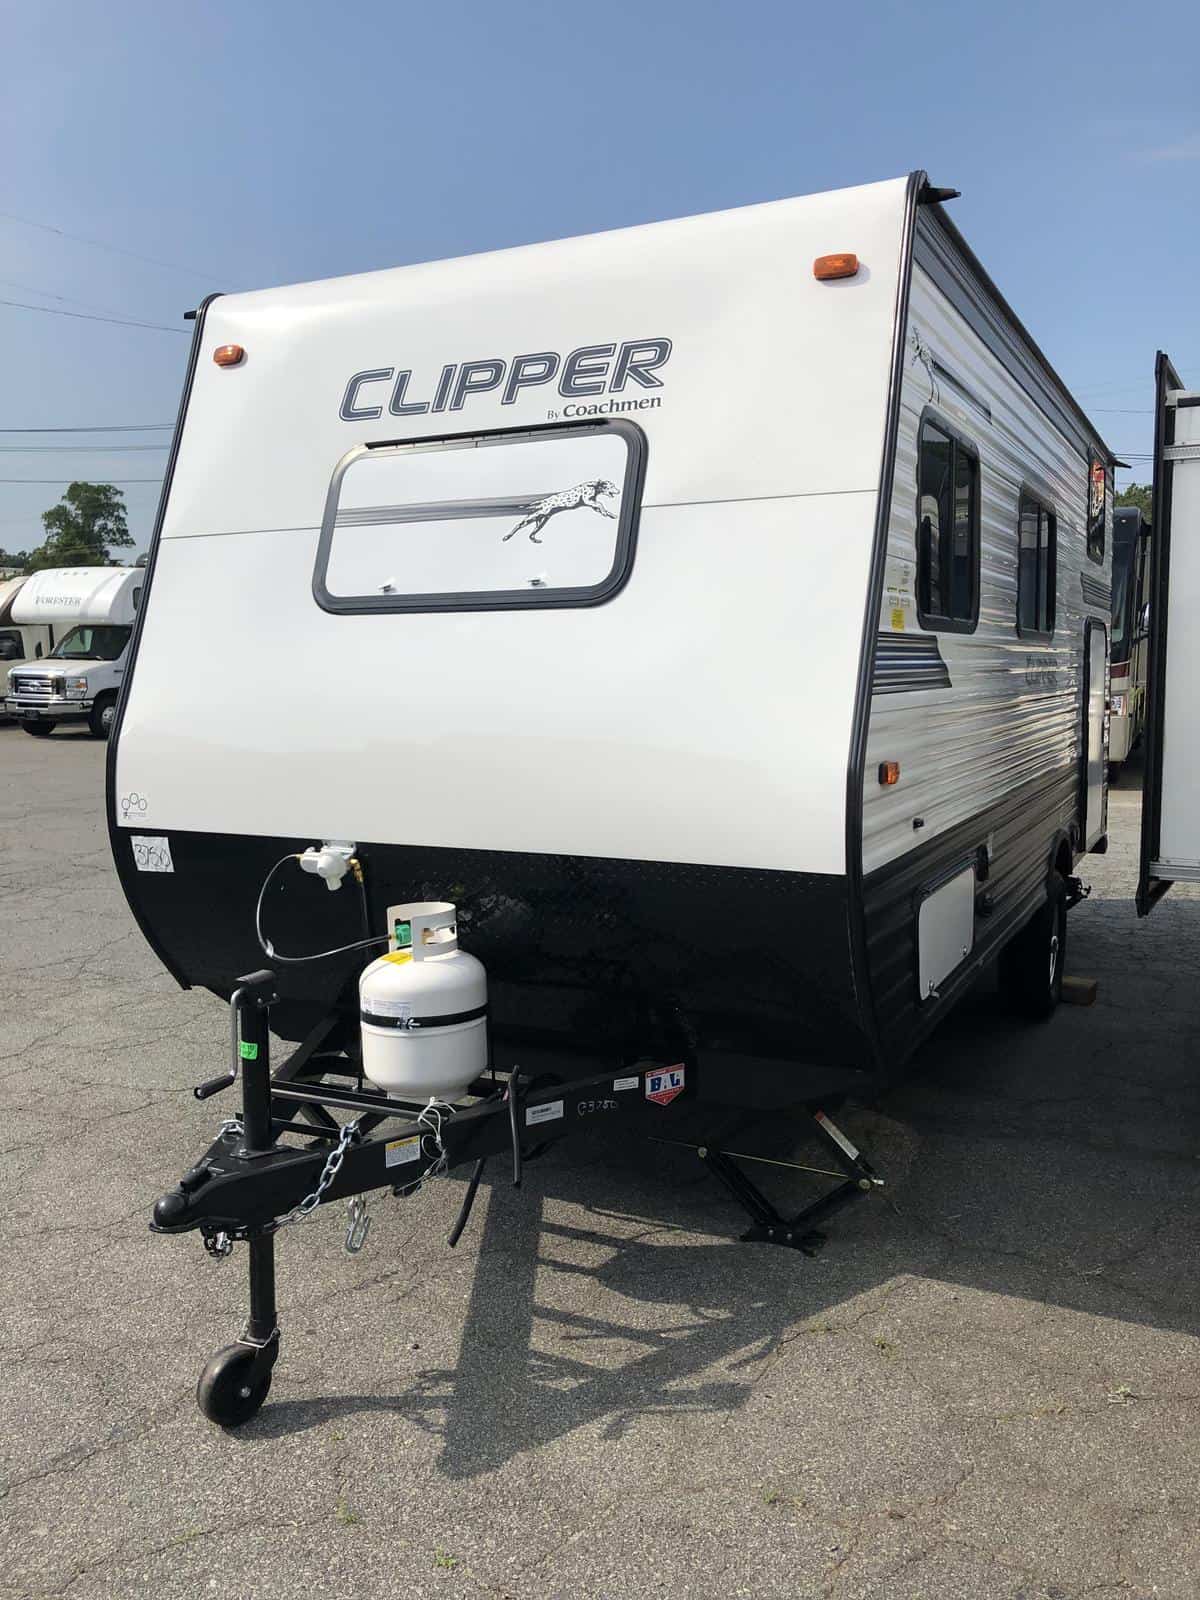 NEW 2020 Forest River CLIPPER 17BH